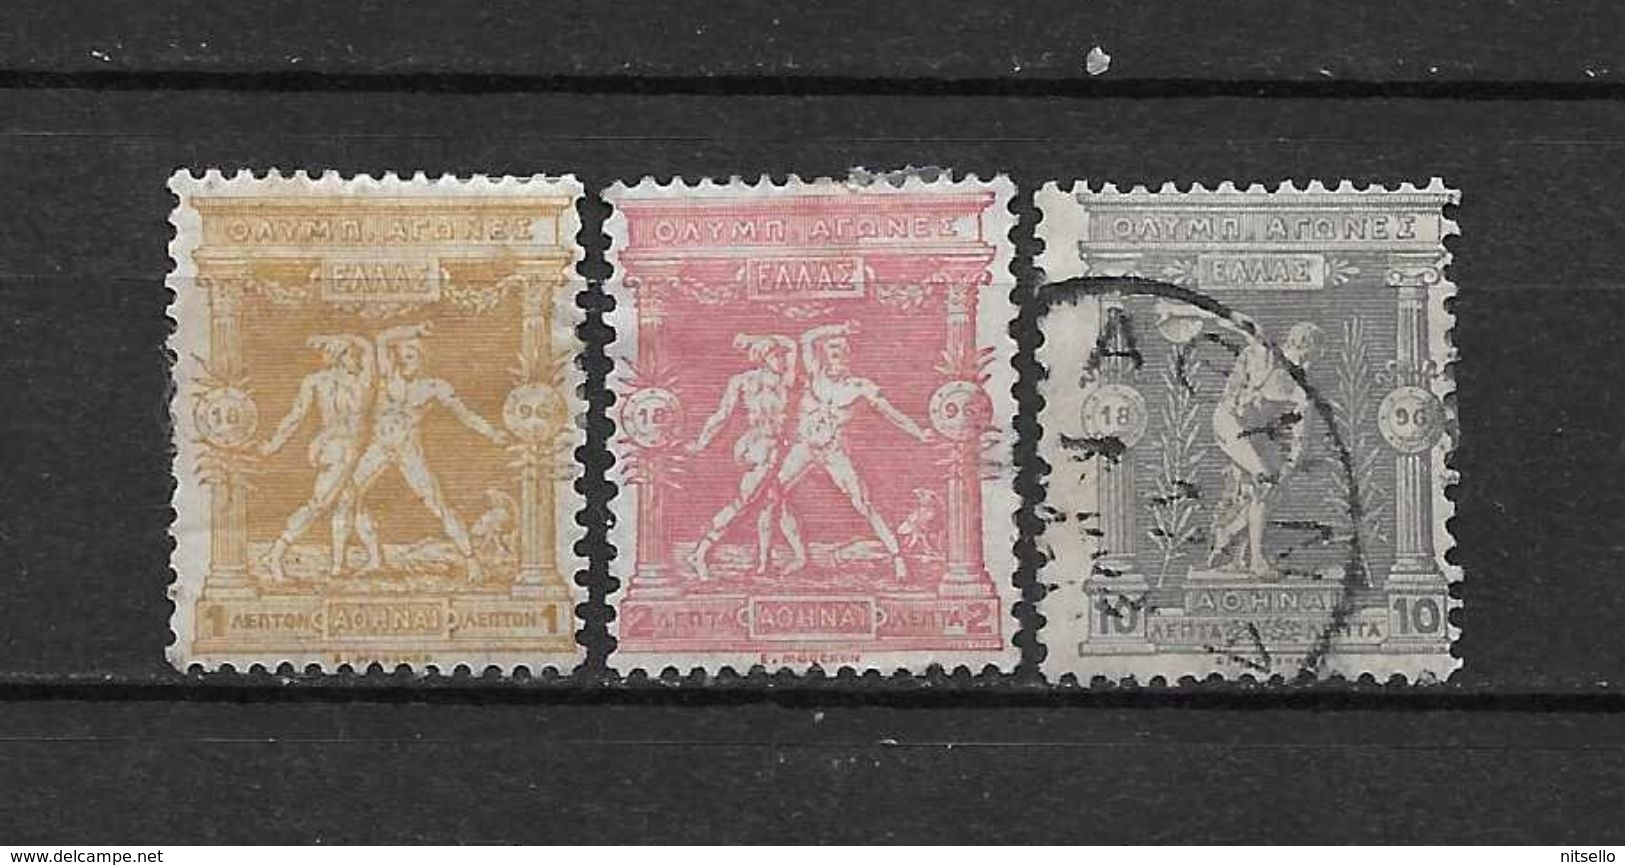 LOTE 1605 /// GRECIA   YVERT Nº 101+102+104    ¡¡¡¡ LIQUIDATION !!!! - Used Stamps